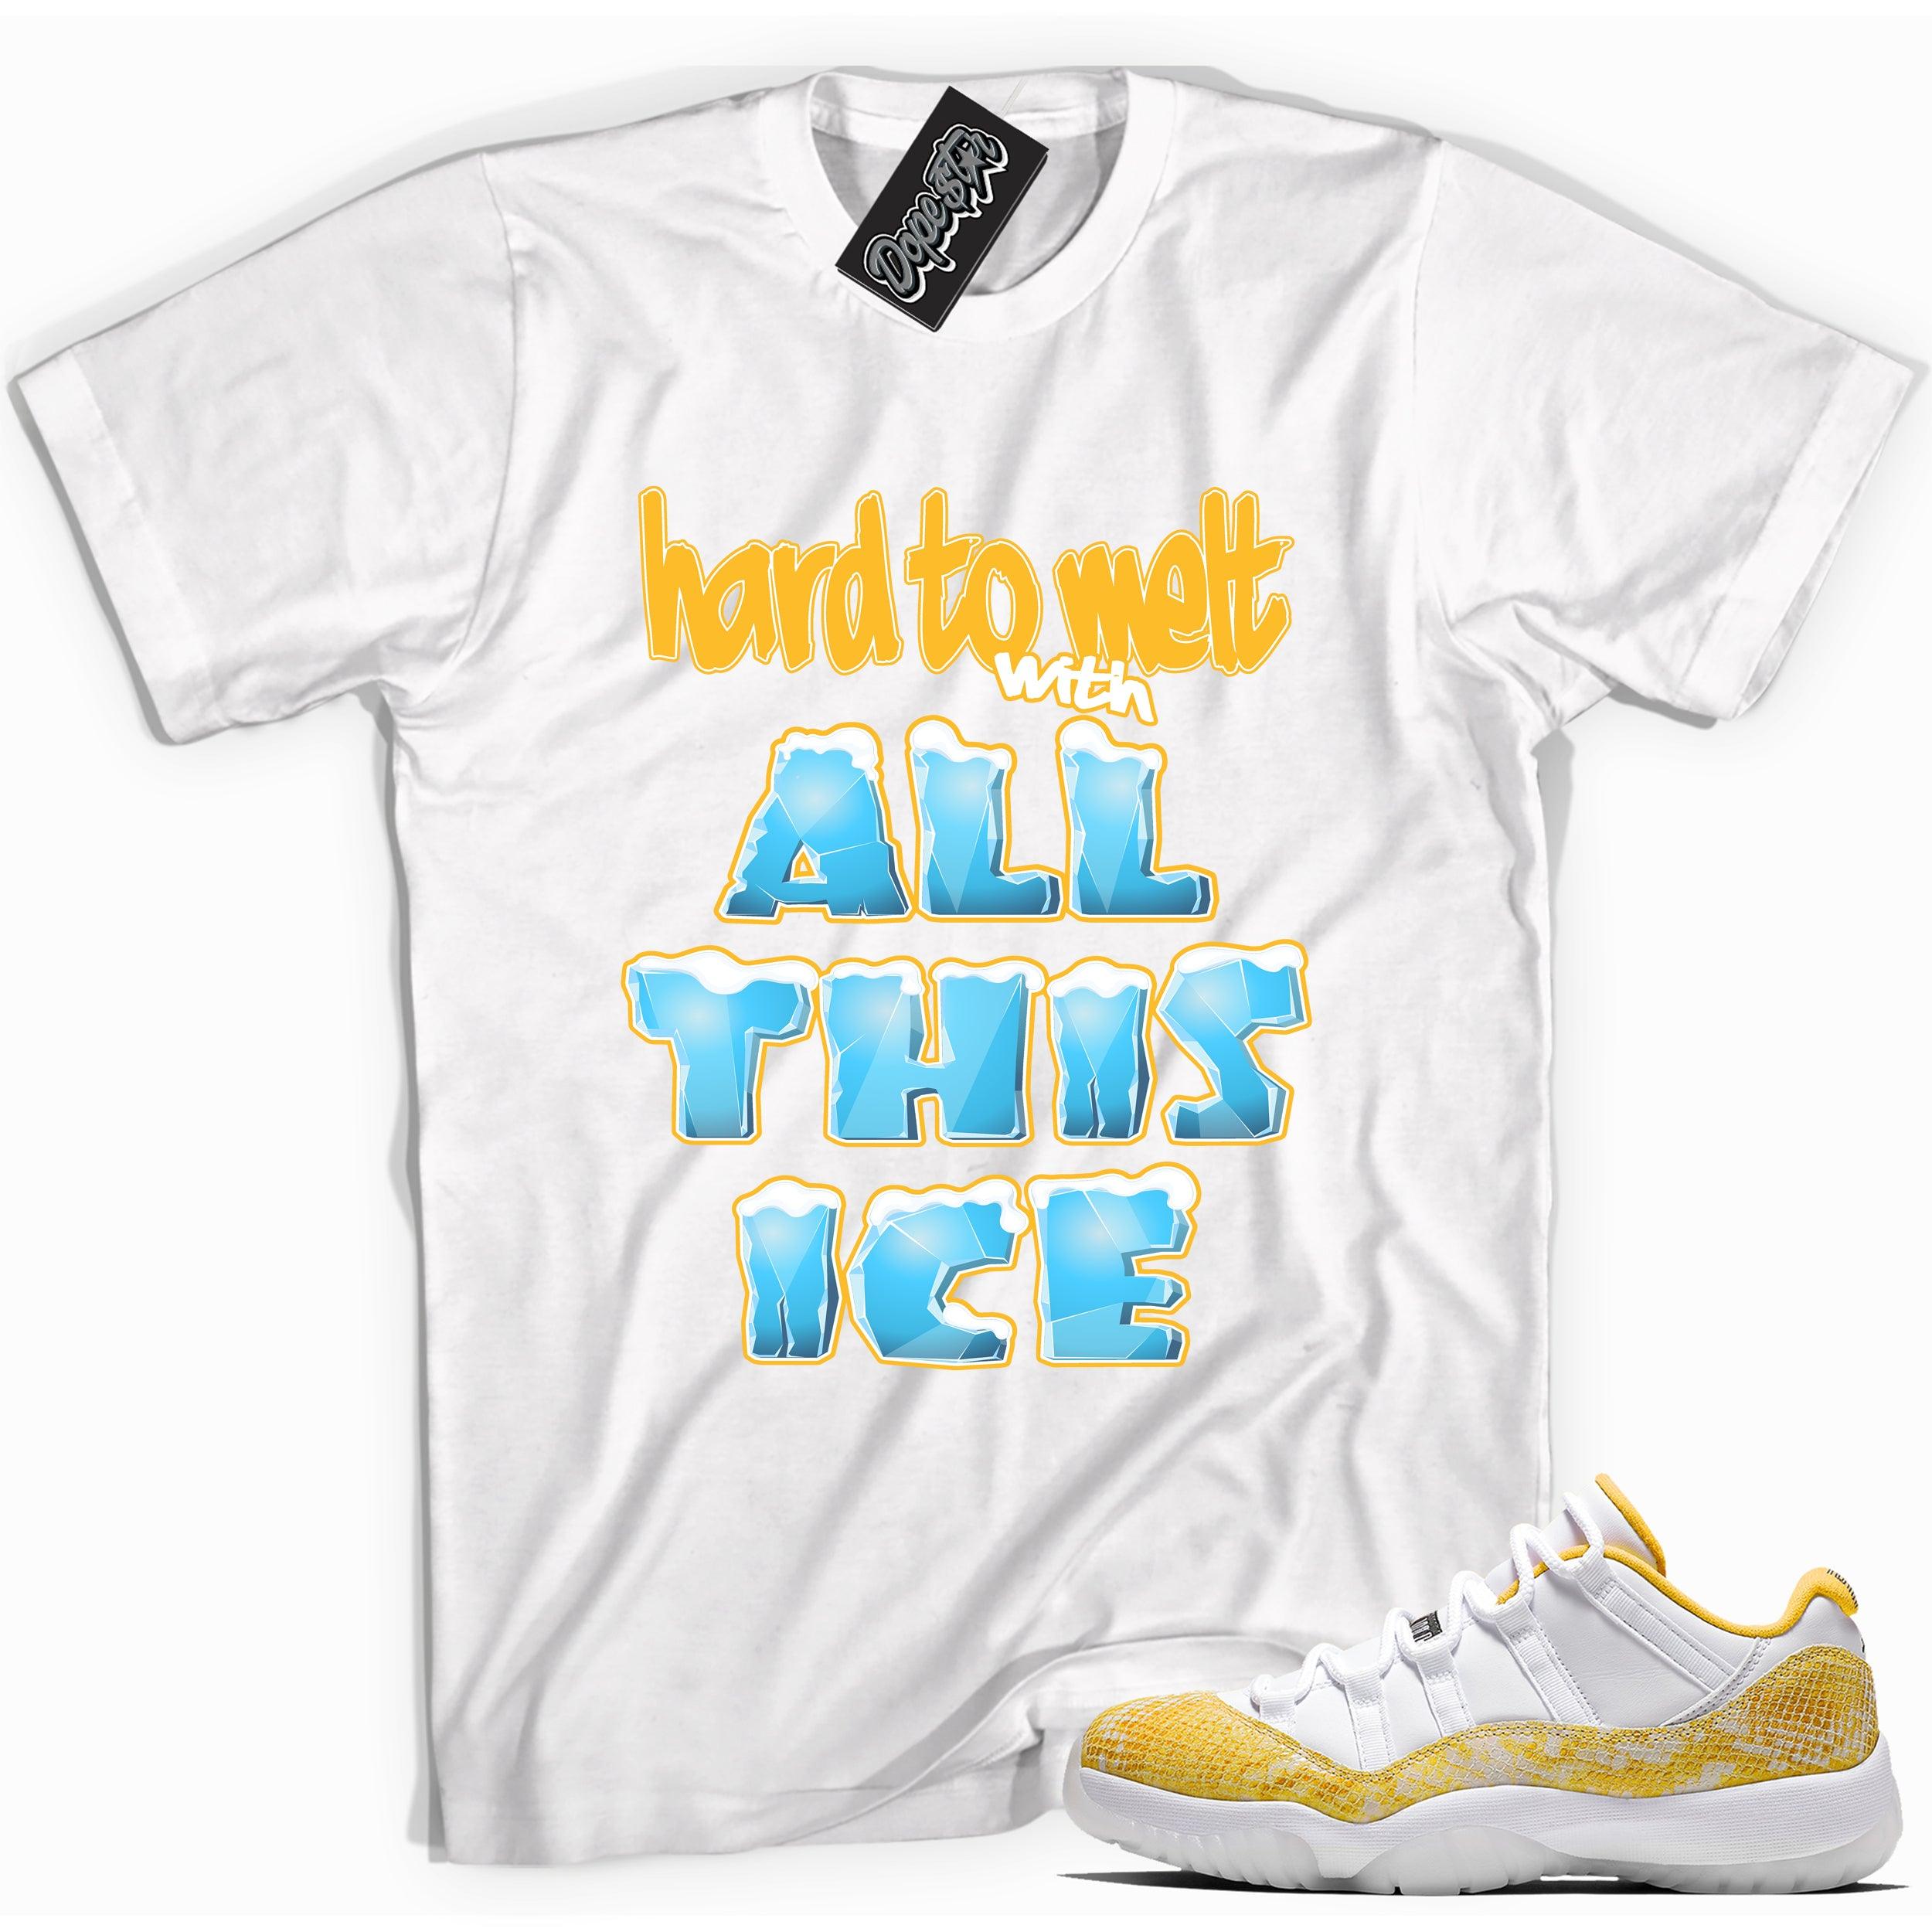 Cool white graphic tee with 'hard to melt with all this ice' print, that perfectly matches Air Jordan 11 Retro Low Yellow Snakeskin sneakers